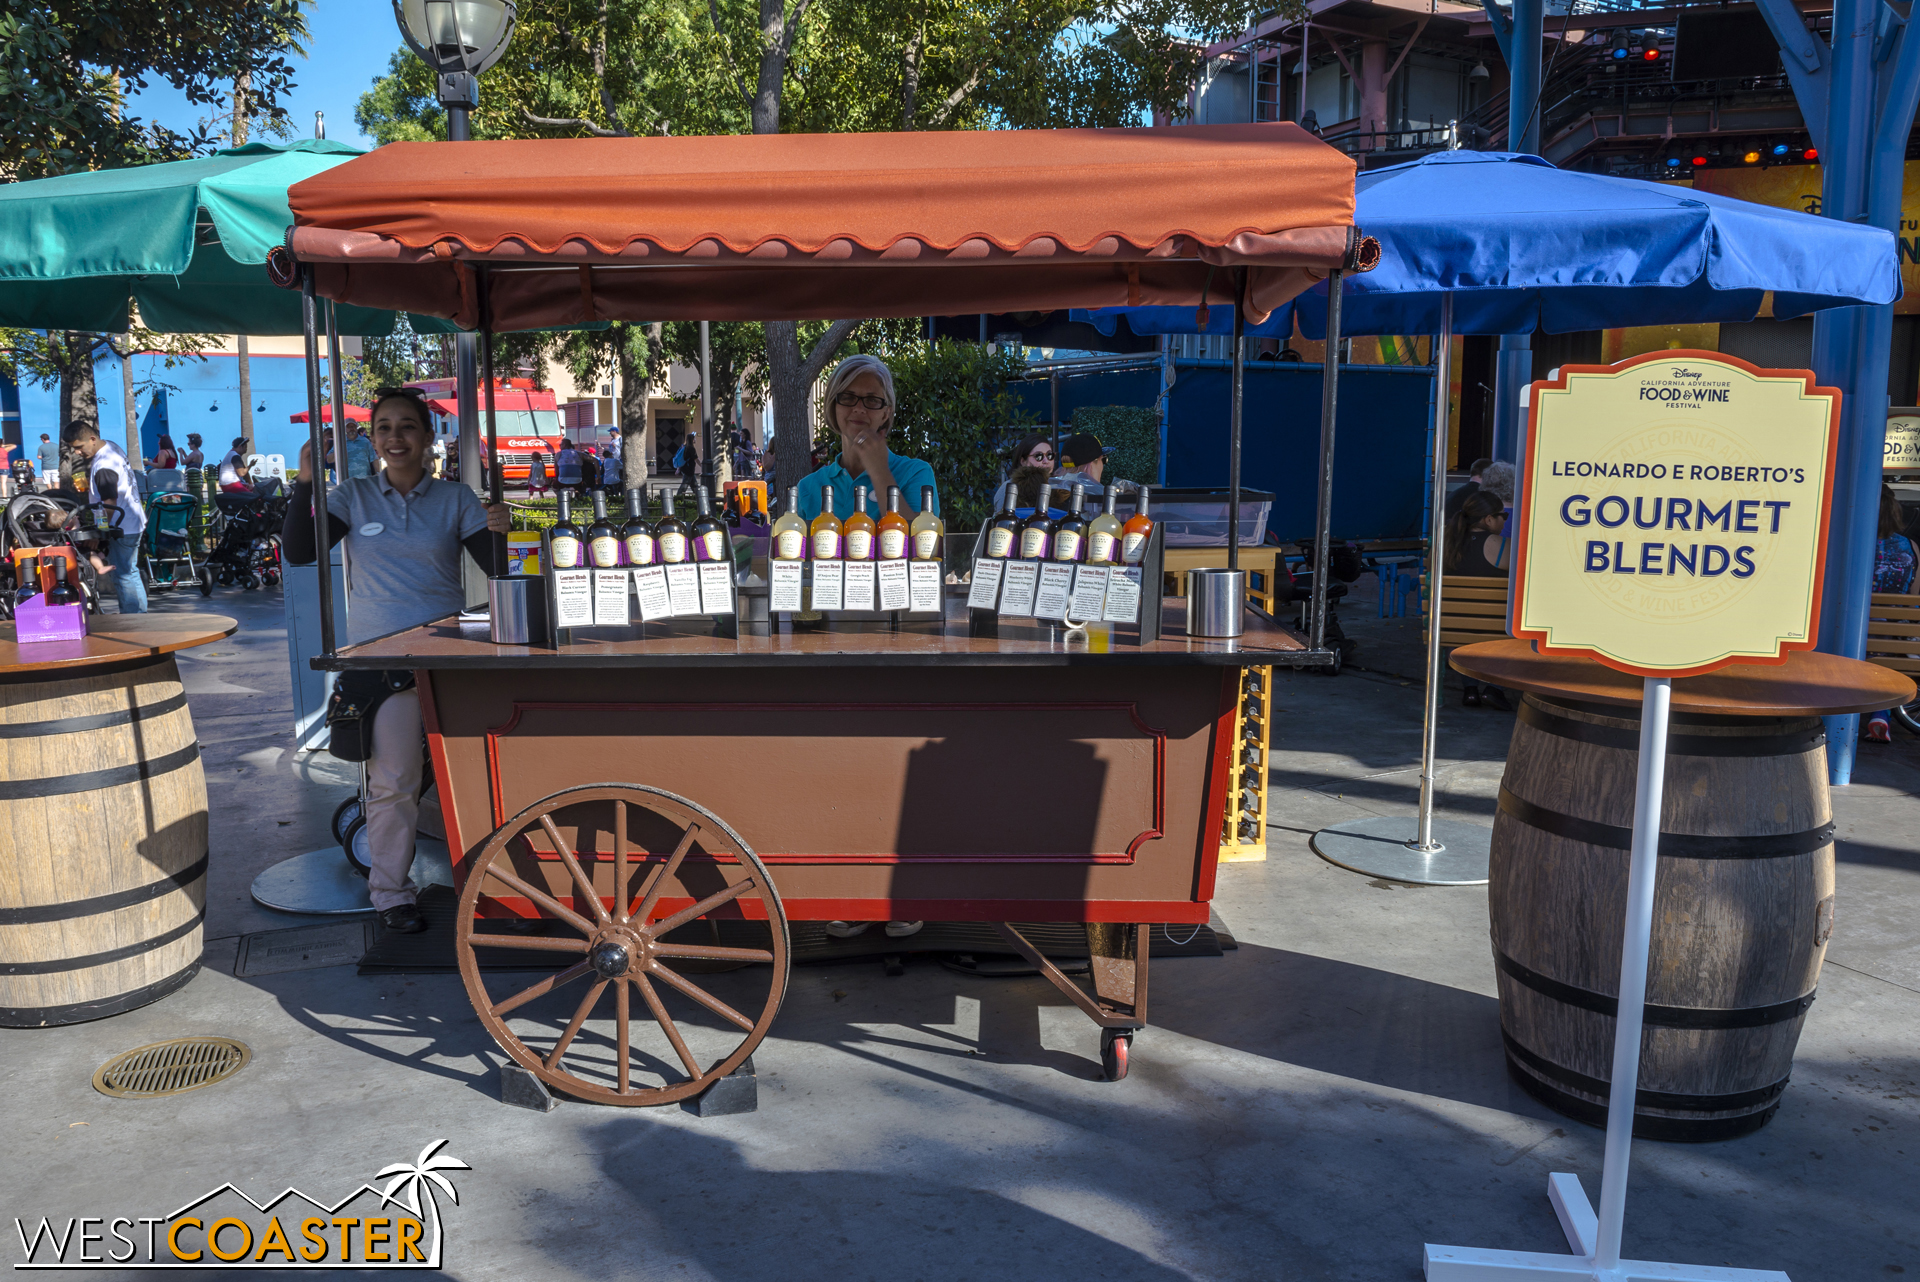  There are vendors in Hollywood Land too, like this balsamic vinegar purveyor. 